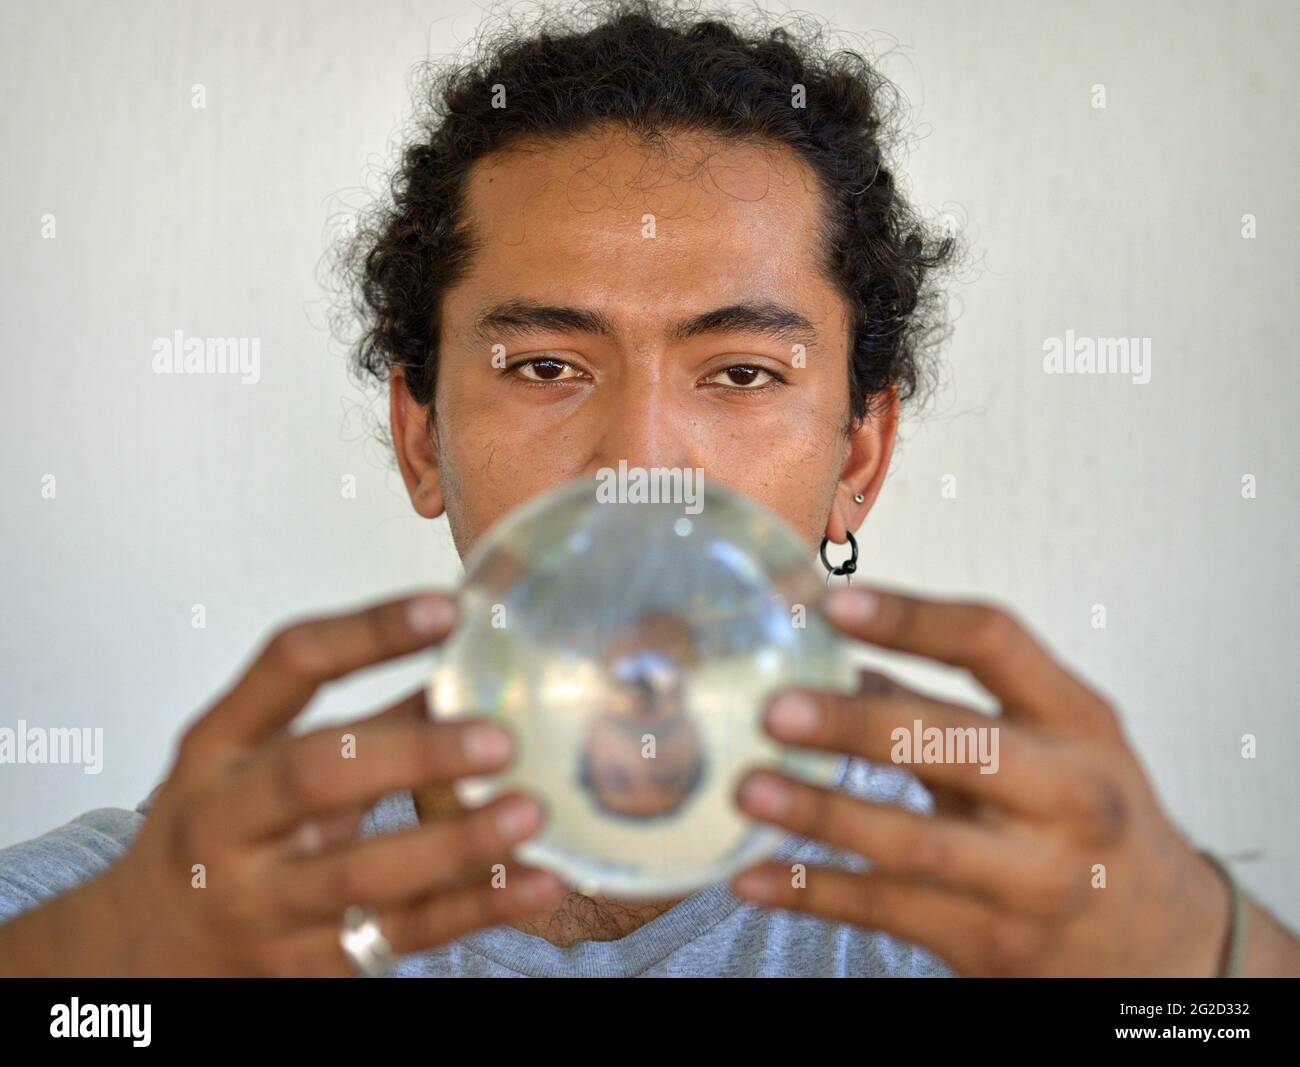 Handsome young Latino man with curls holds a crystal ball with his vertically flipped mirror image and stares at the viewer with mesmerizing eyes. Stock Photo